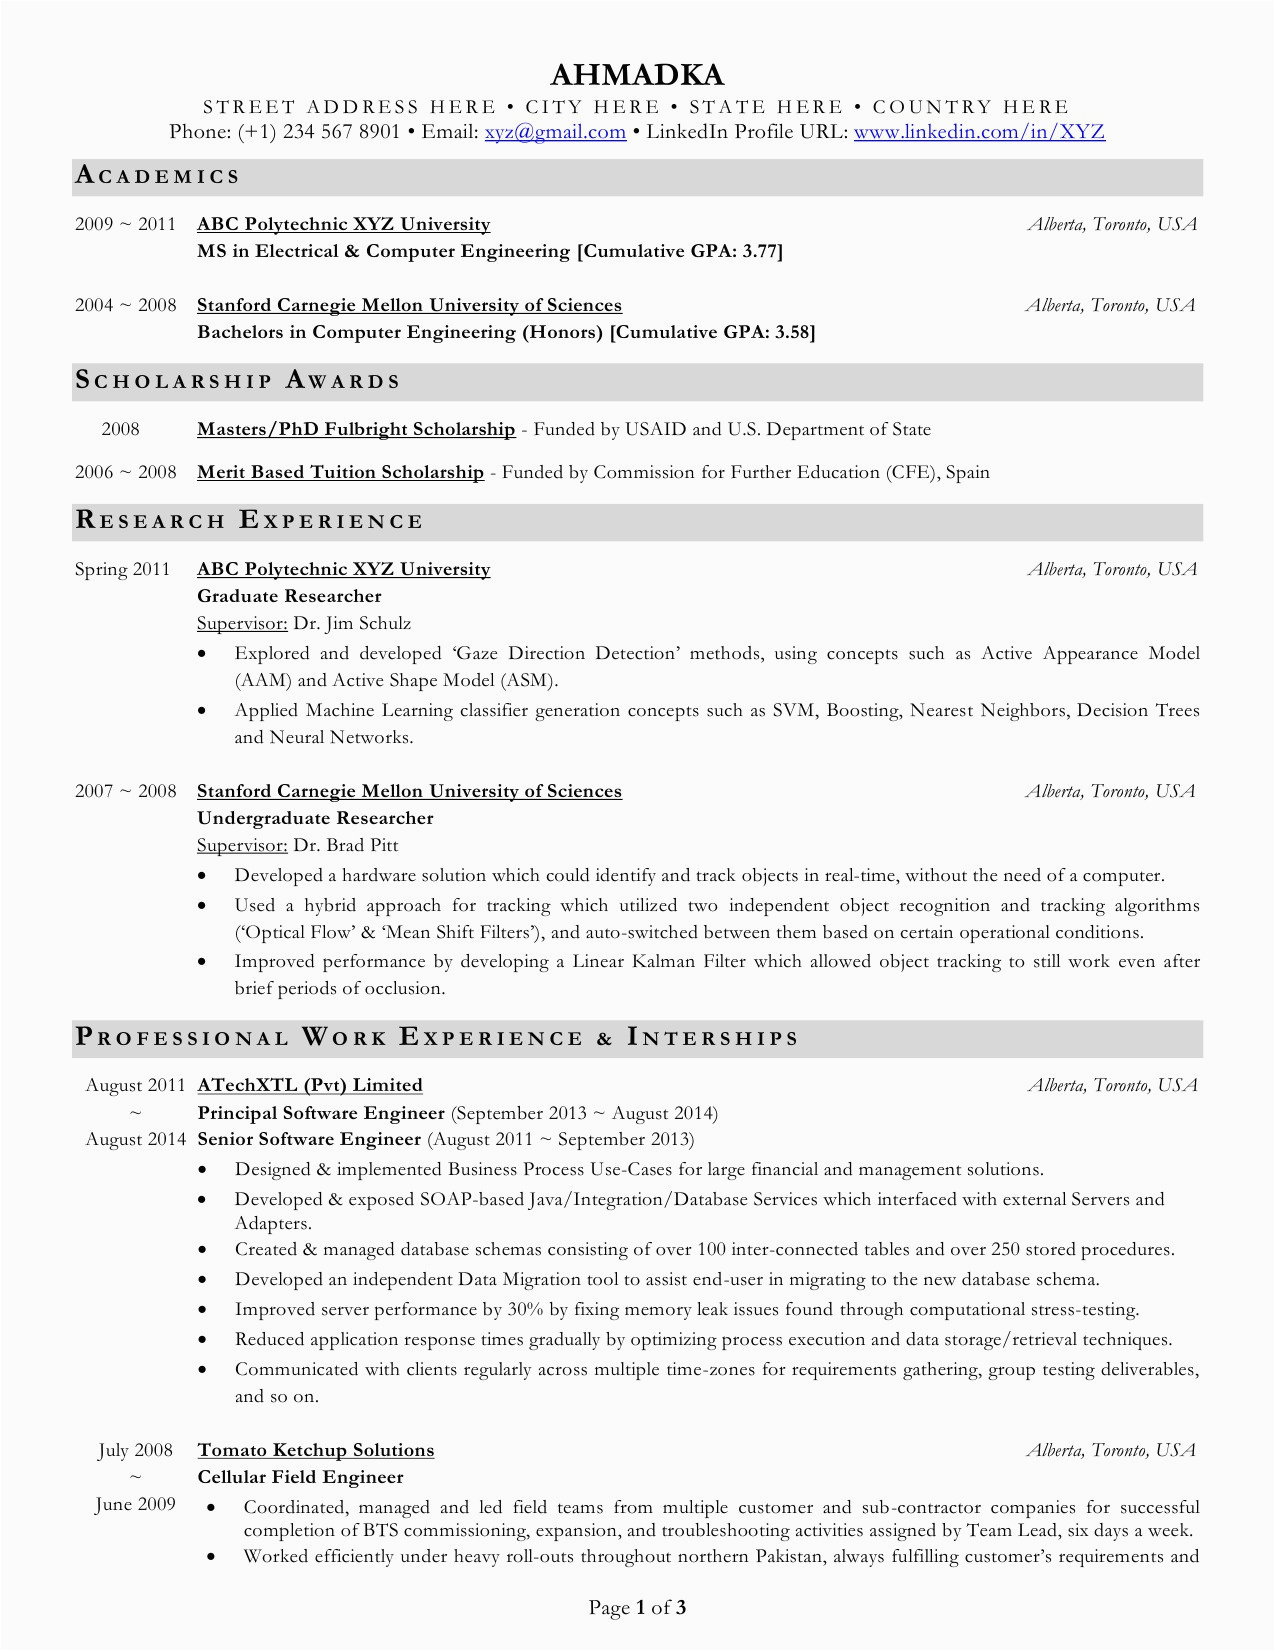 Sample Resume for Masters In Computer Science is My Cv Okay for Uploading with Cs Masters Applications